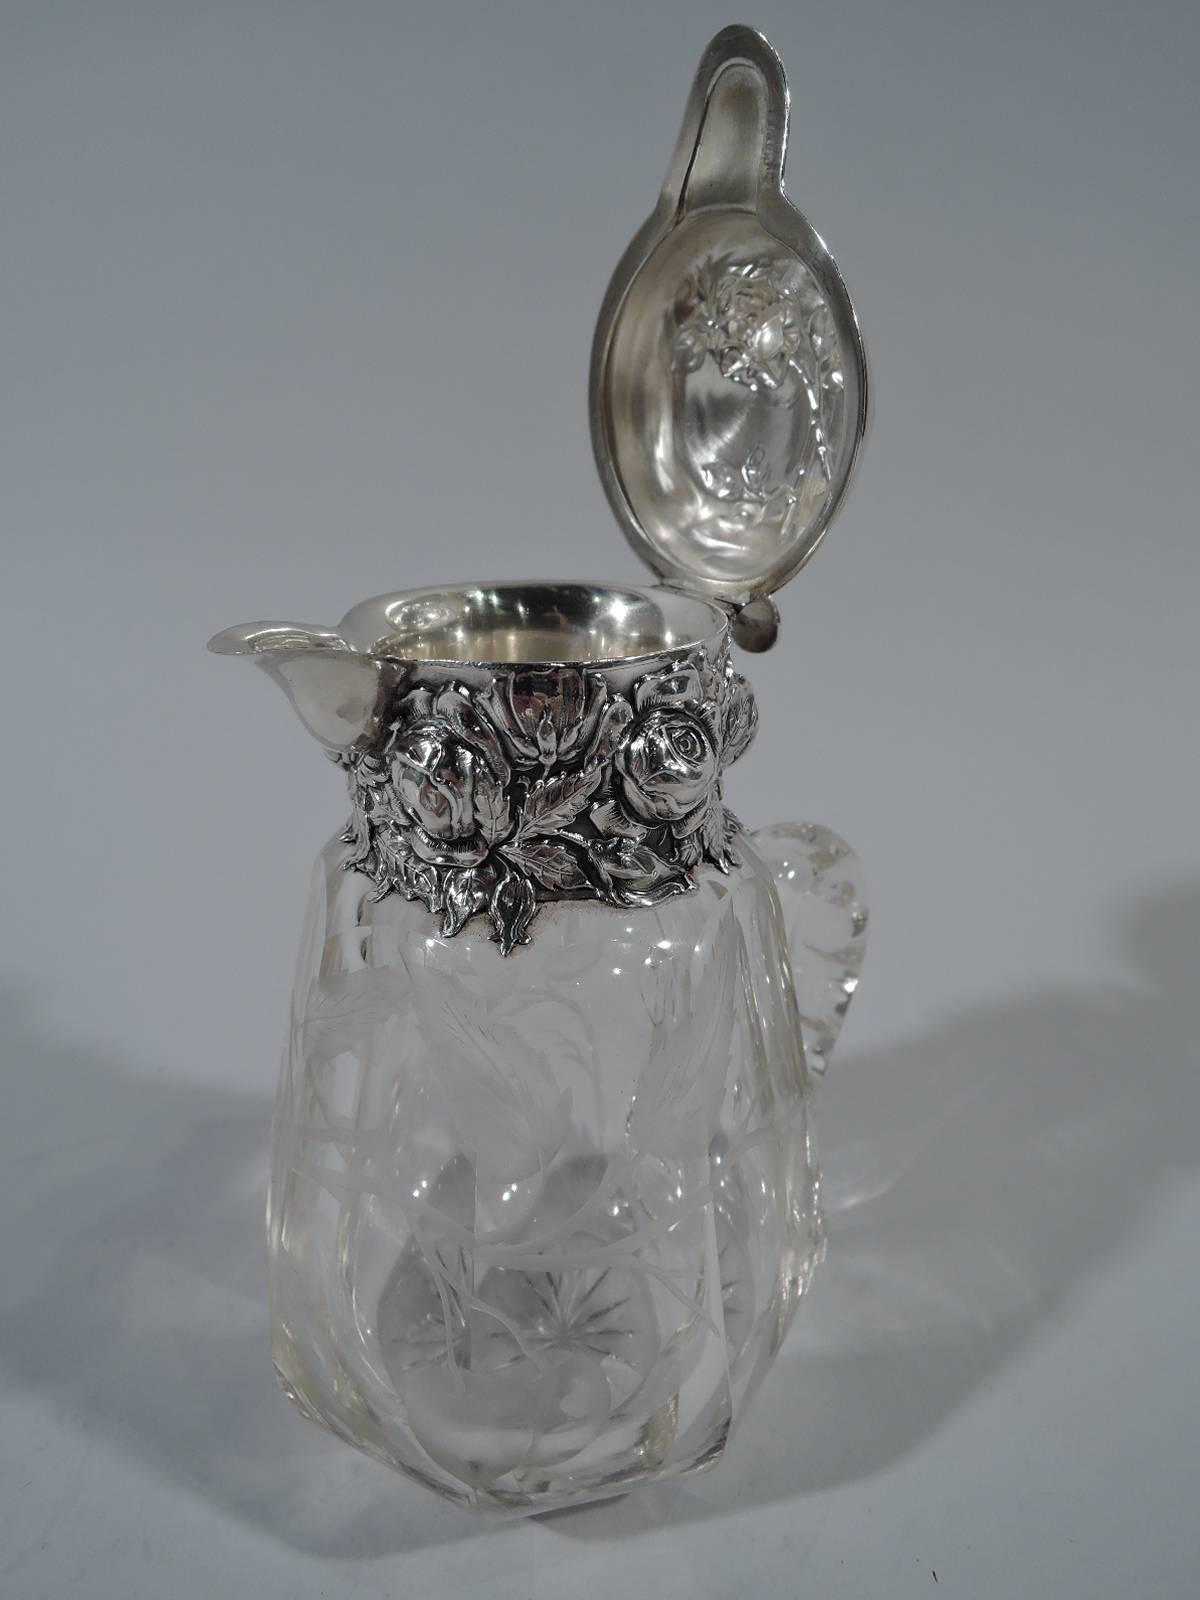 Victorian Antique American Repousse Sterling Silver and Etched Glass Syrup Jug